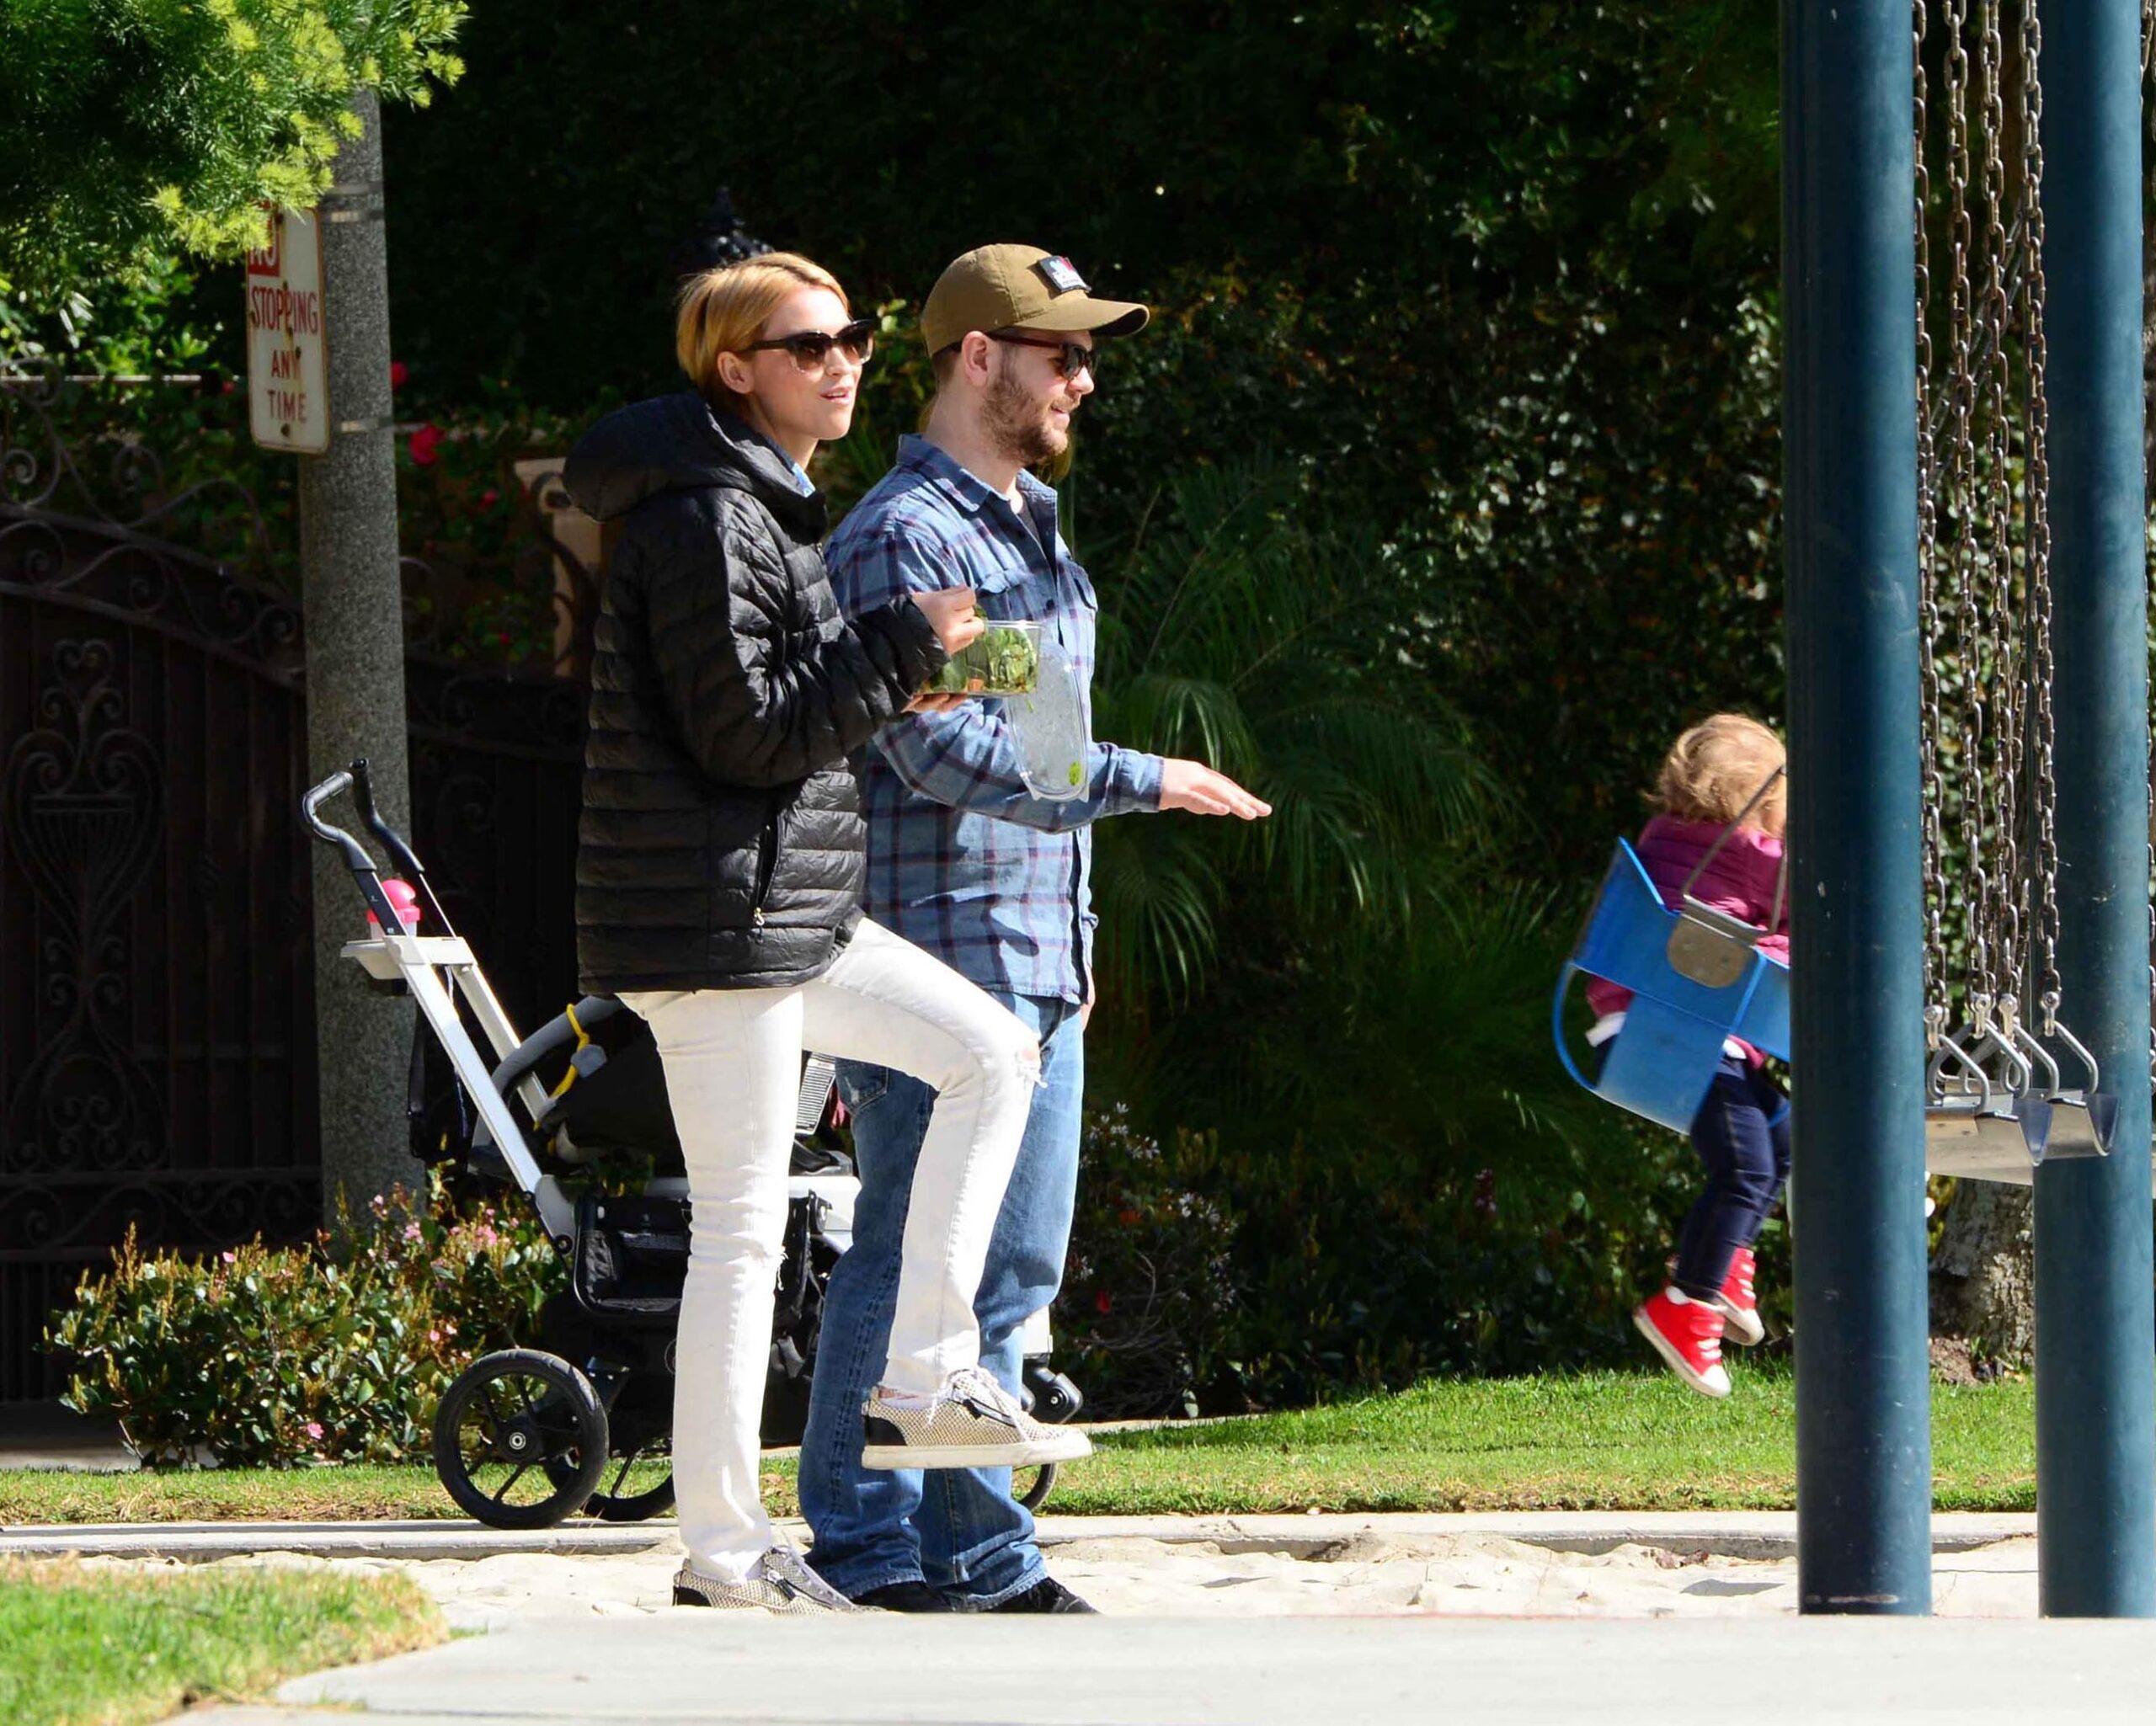 JACK OSBOURNE AND FAMILY AT THE PARK IN BEVERLY HILLS